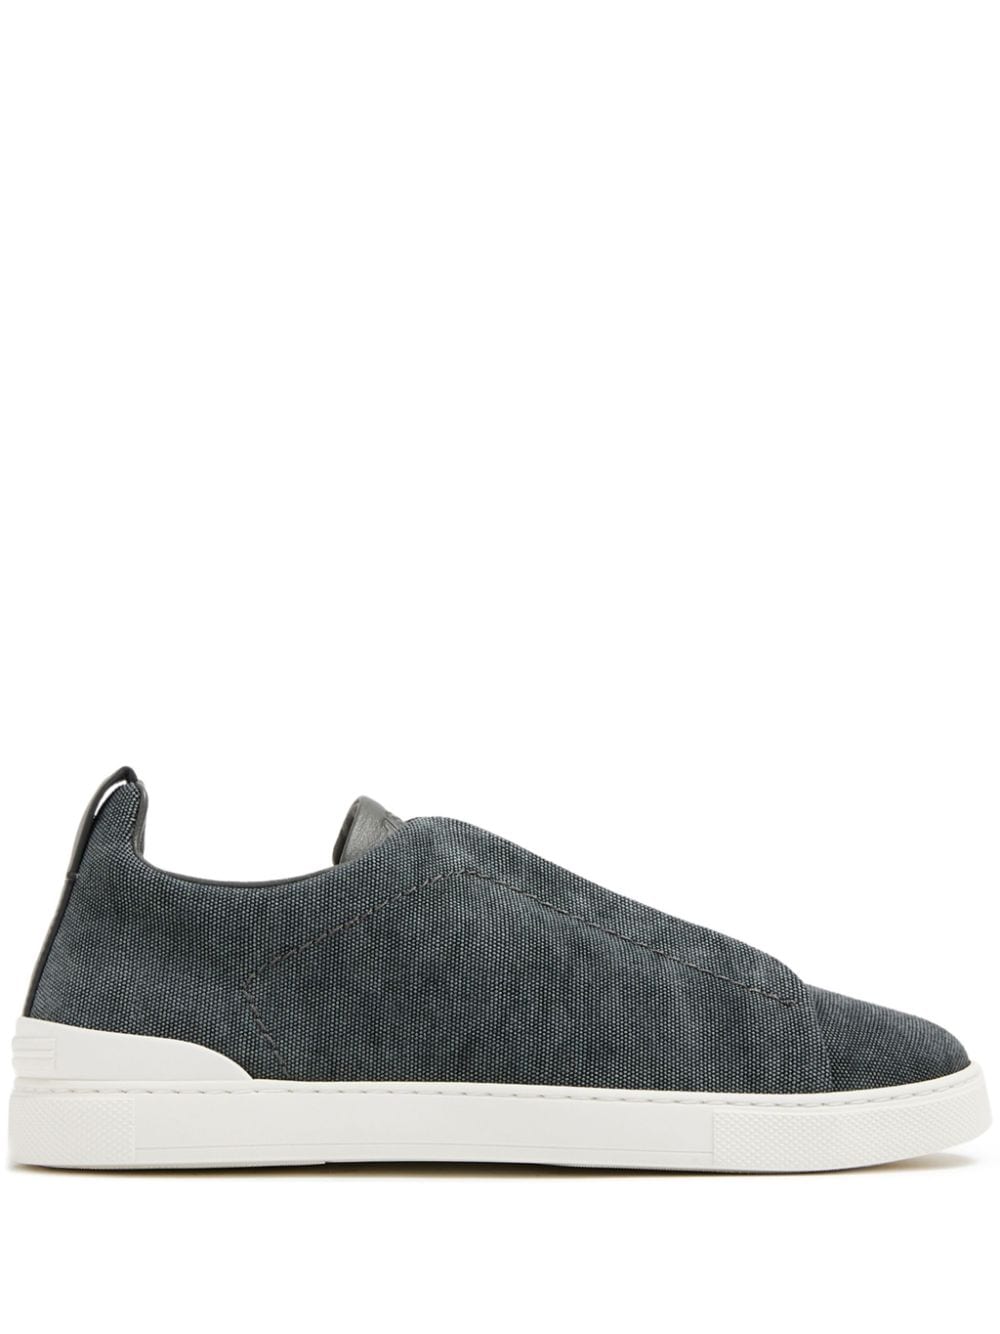 Zegna Triple Stitch Canvas Sneakers In Grey